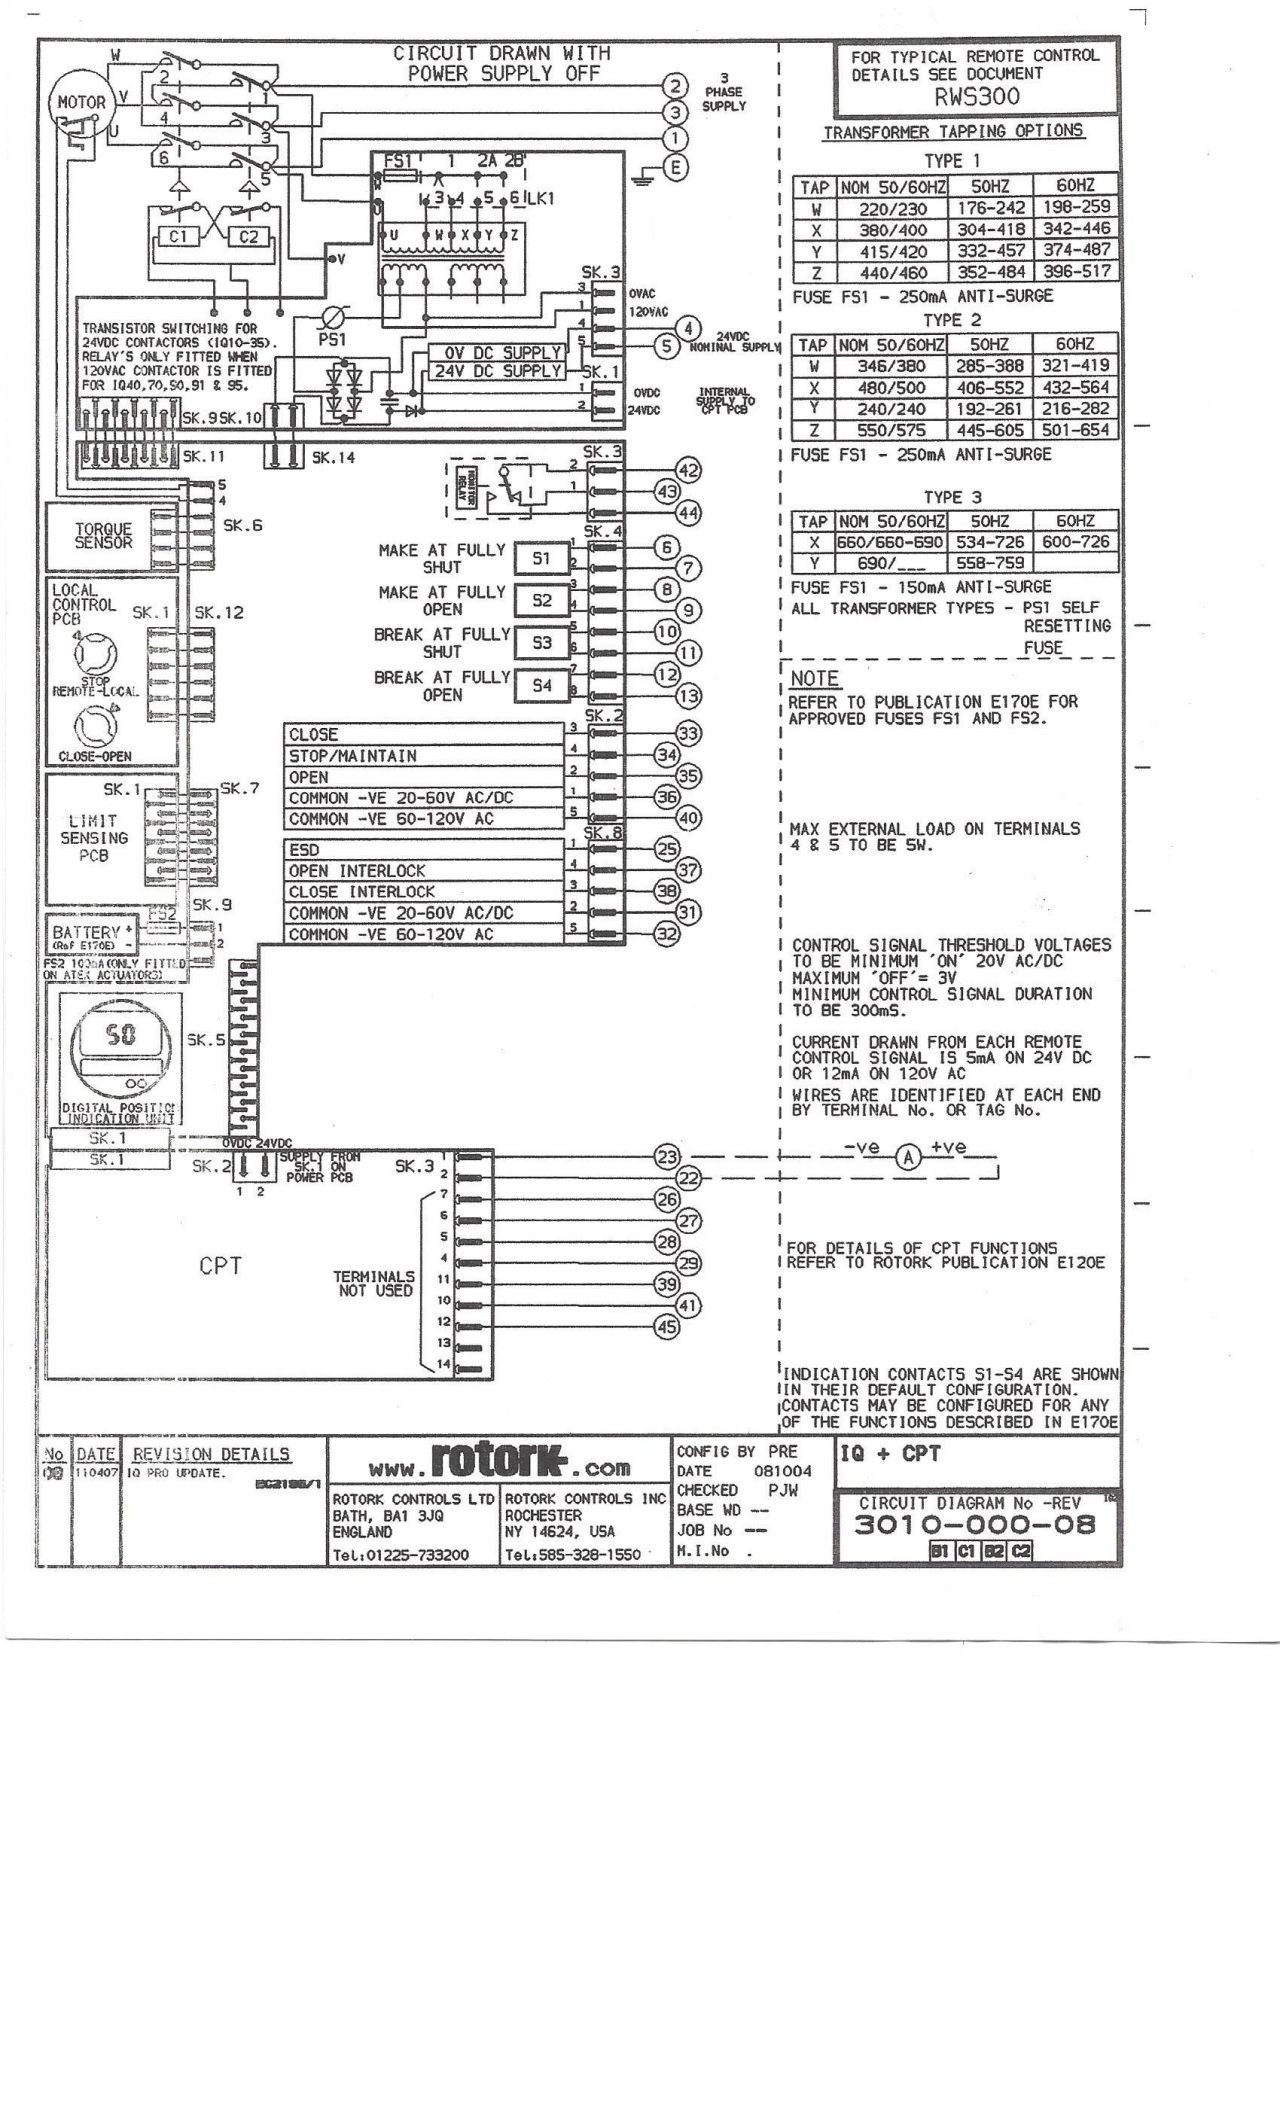 Wiring Diagram For Motor Operated Valve Fresh Movg Rotork Also Auma